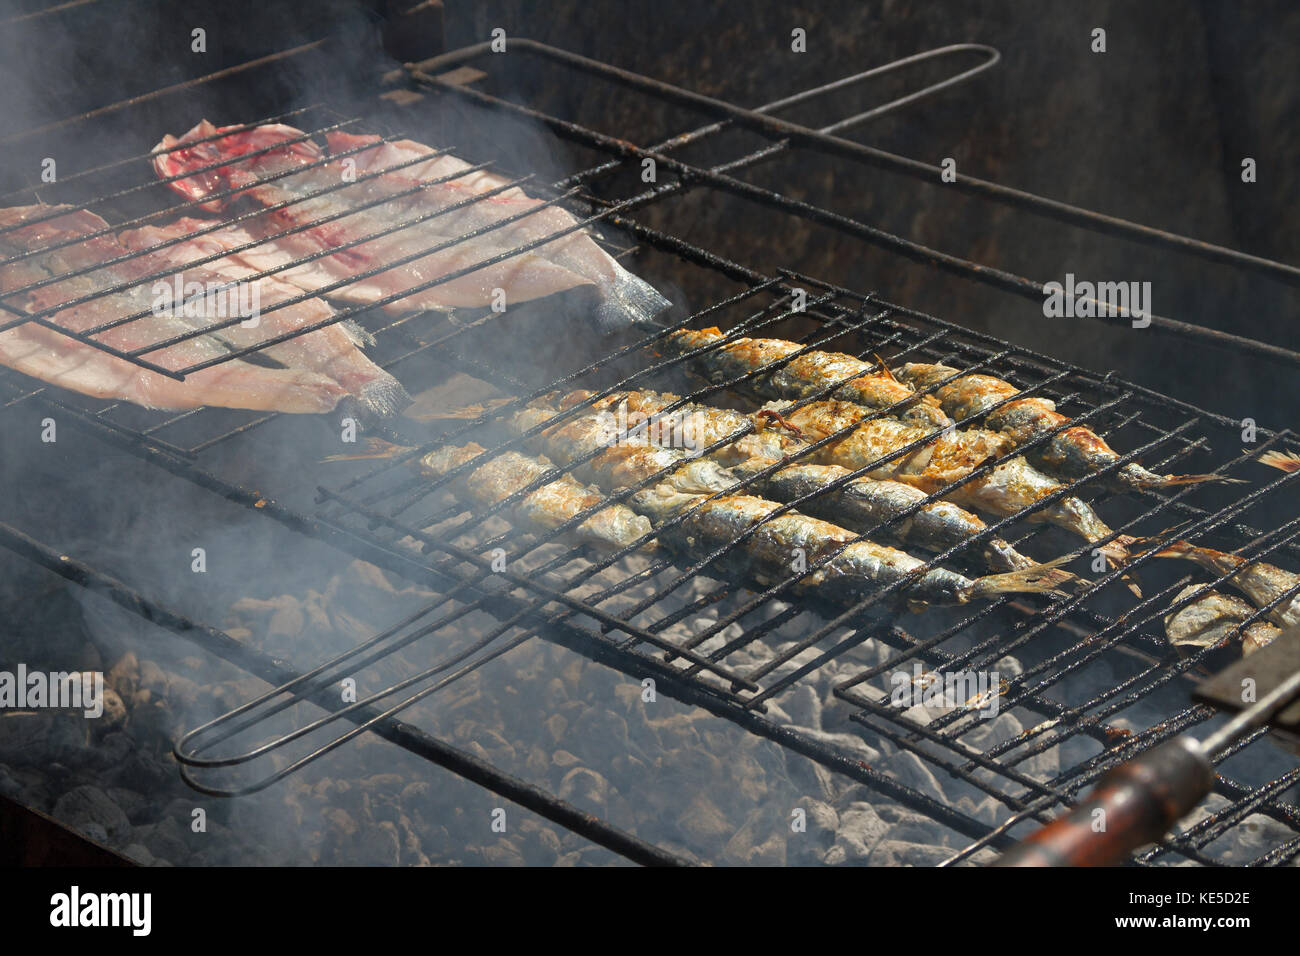 Fried fish on a hot coal on the banks of the river Dora in Afurada, Portugal. Stock Photo